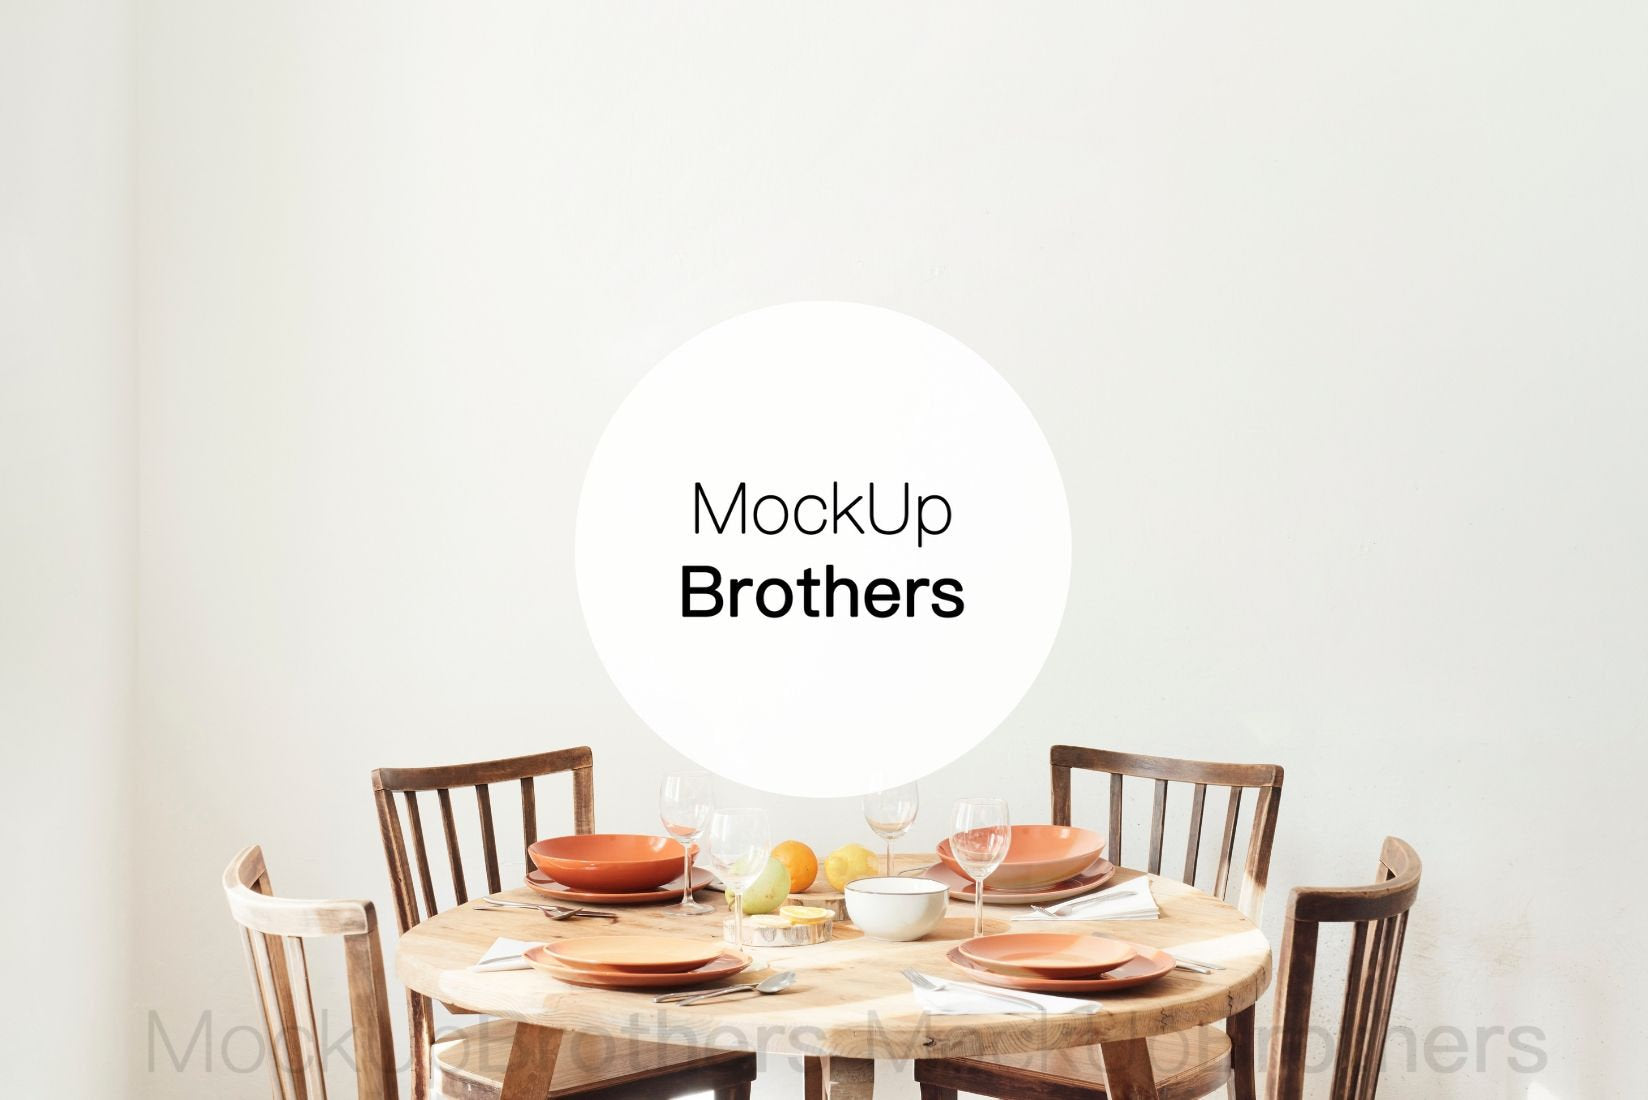 Dining room wall stock photo by Mockup Brothers